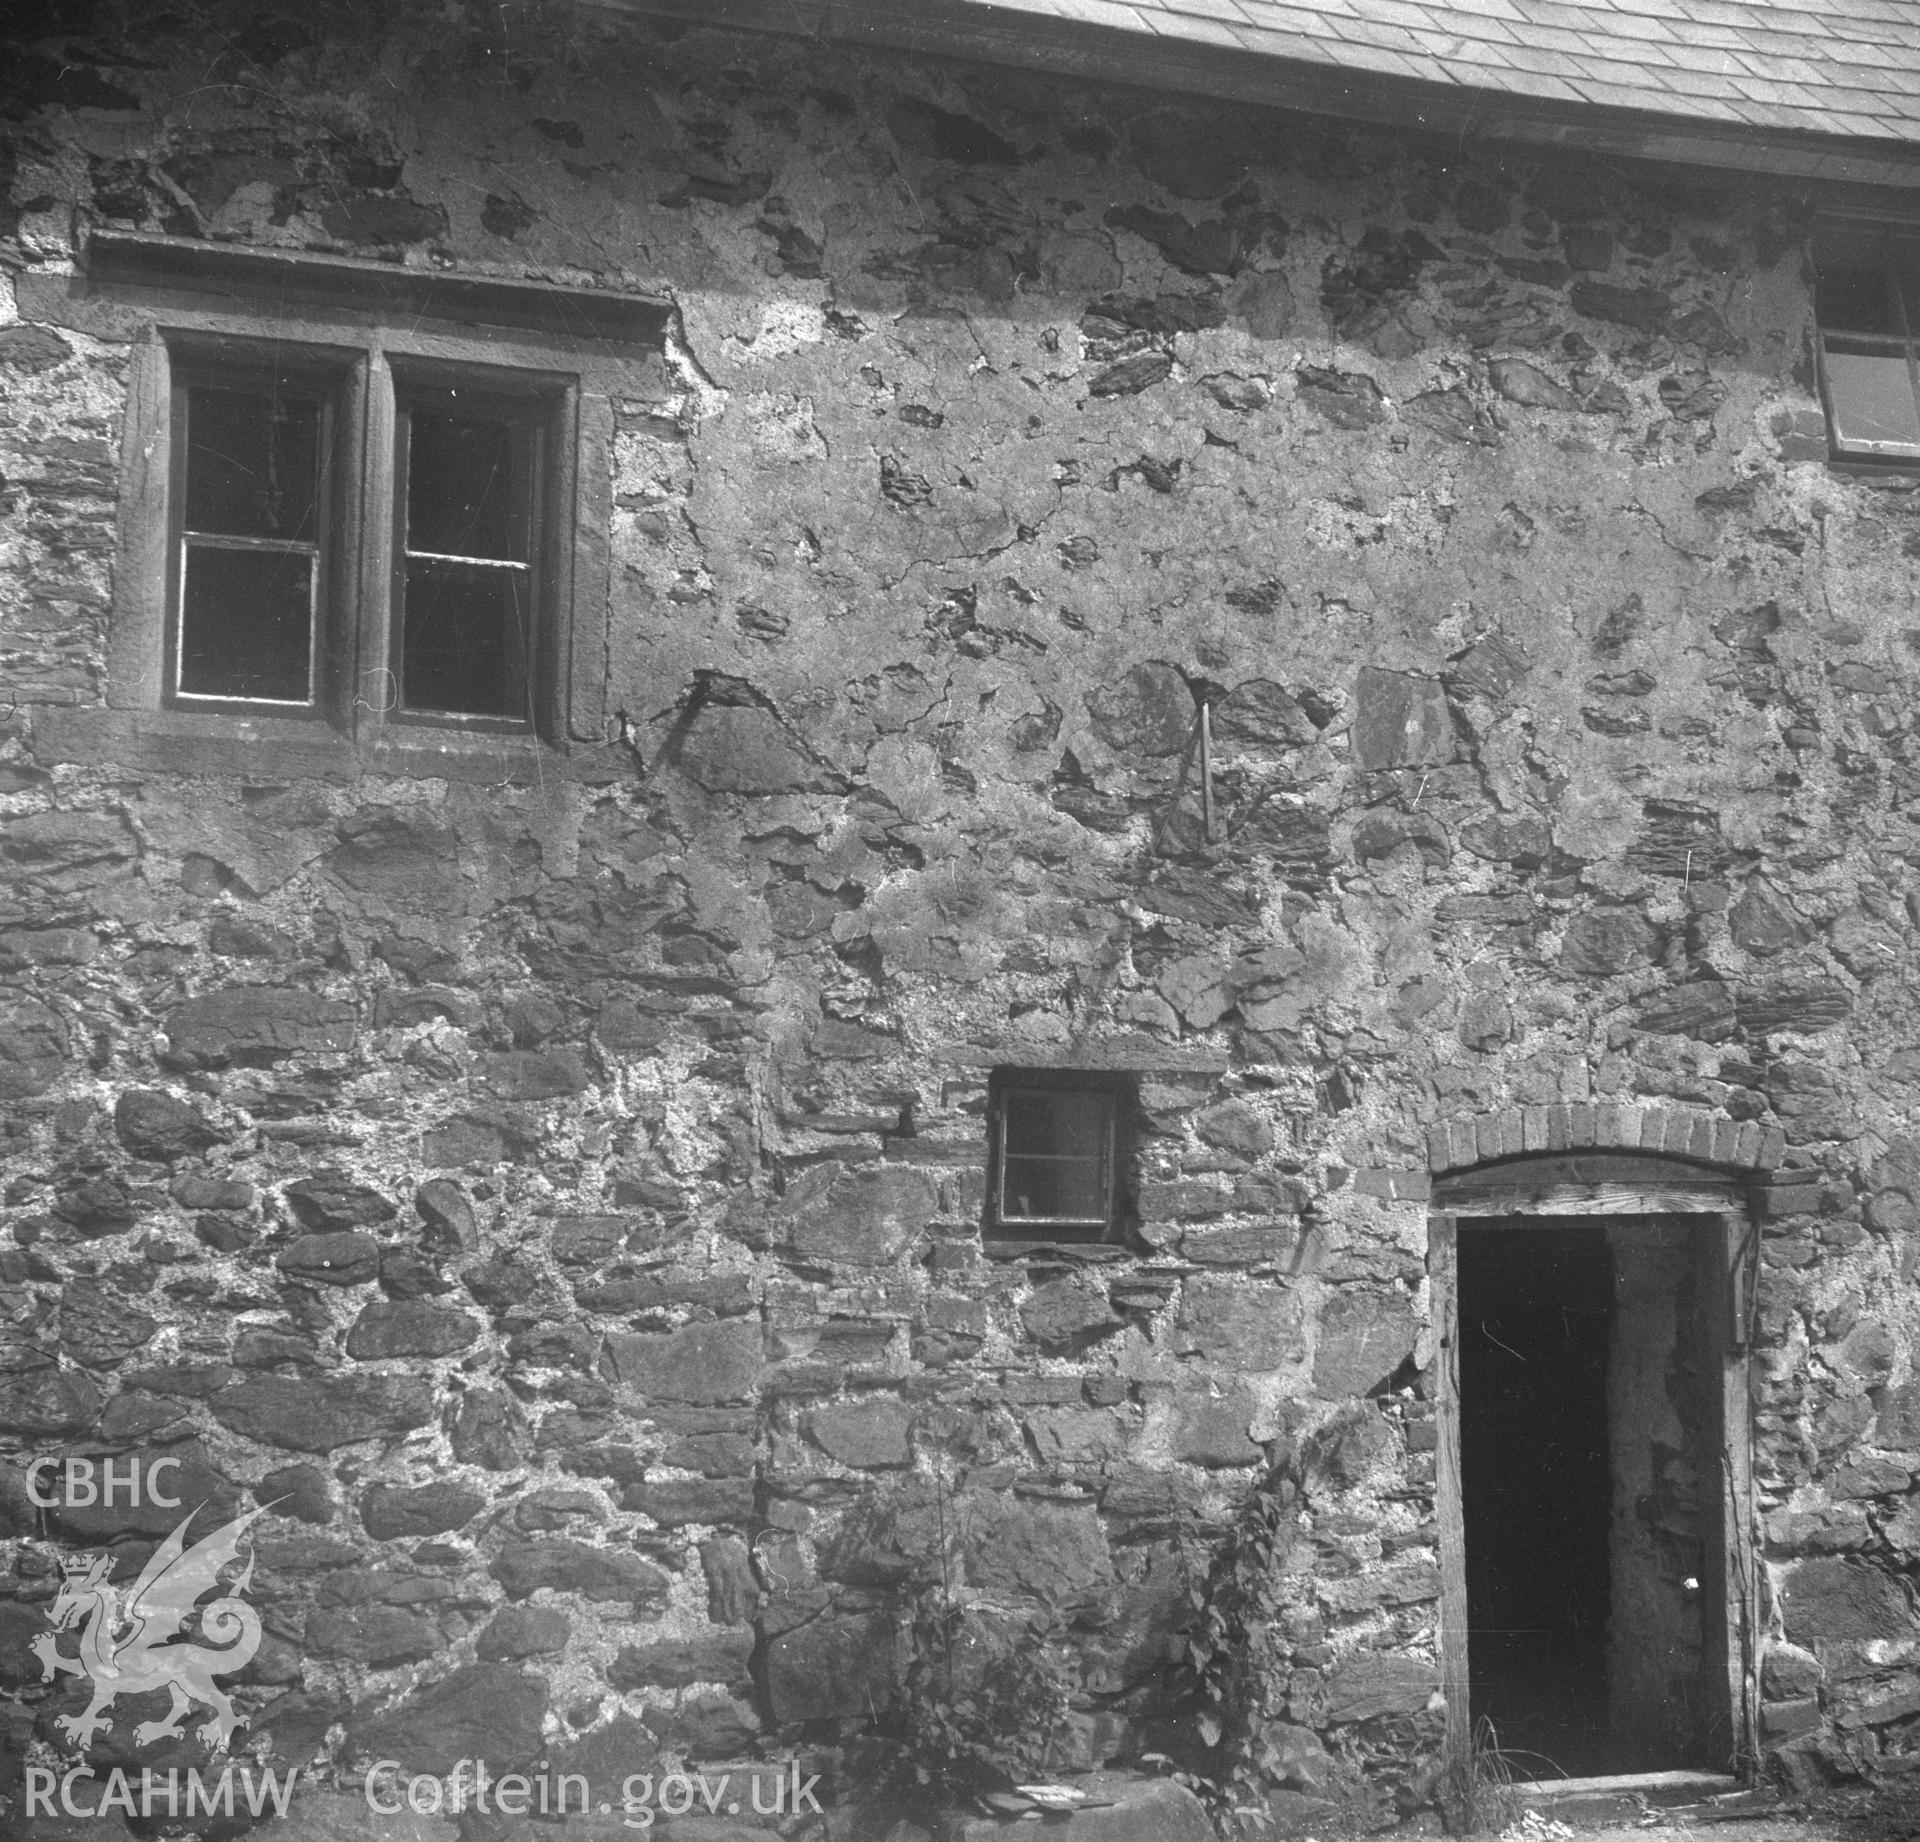 Black and white acetate negative showing exterior stone wall detail, Brithdir-Mawr, Cilcain.